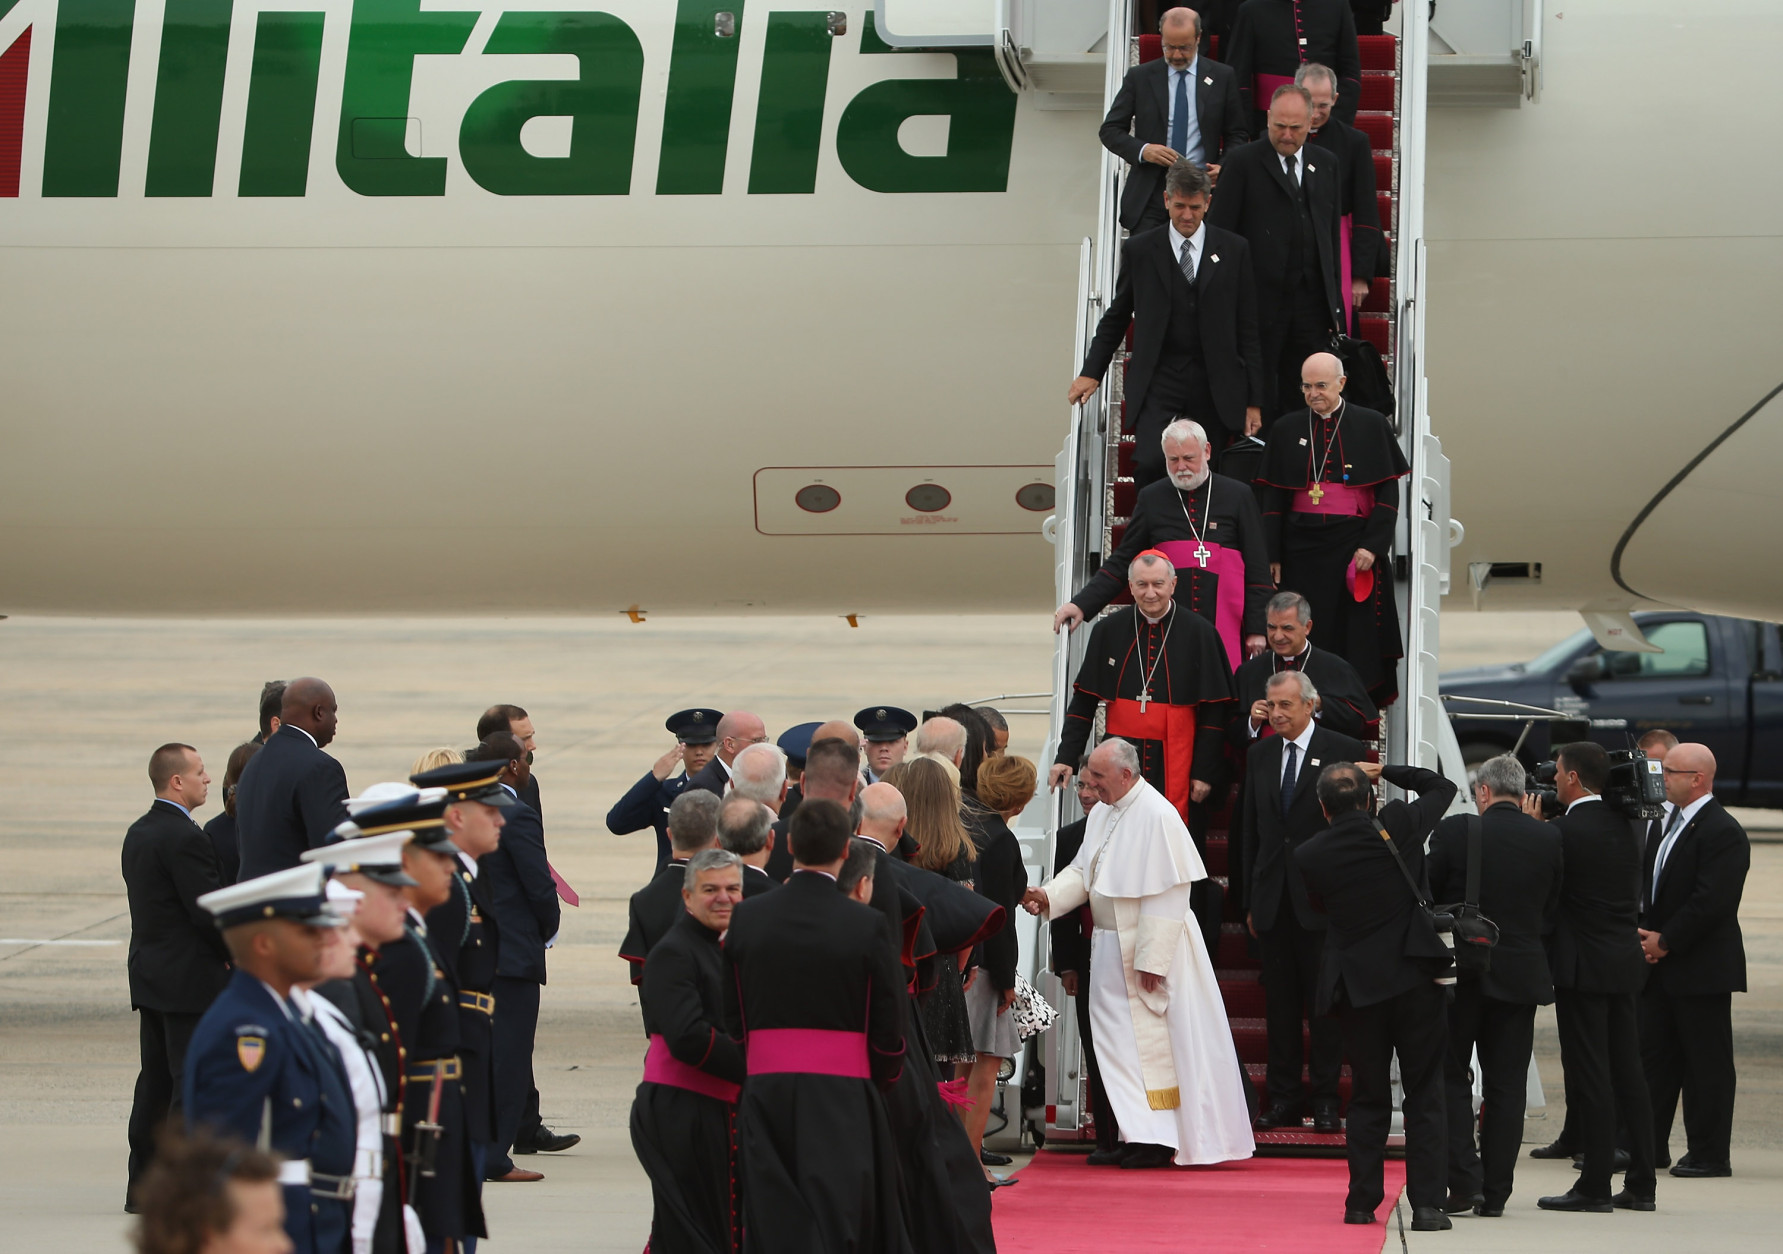 Pope Francis is greeted by U.S. President Barack Obama, first lady Michelle Obama, Vice President Joe Biden and other political and Catholic church leaders after arriving from Cuba September 22, 2015 at Joint Base Andrews, Maryland. Francis will be visiting Washington, New York City and Philadelphia during his first trip to the United States as pope.